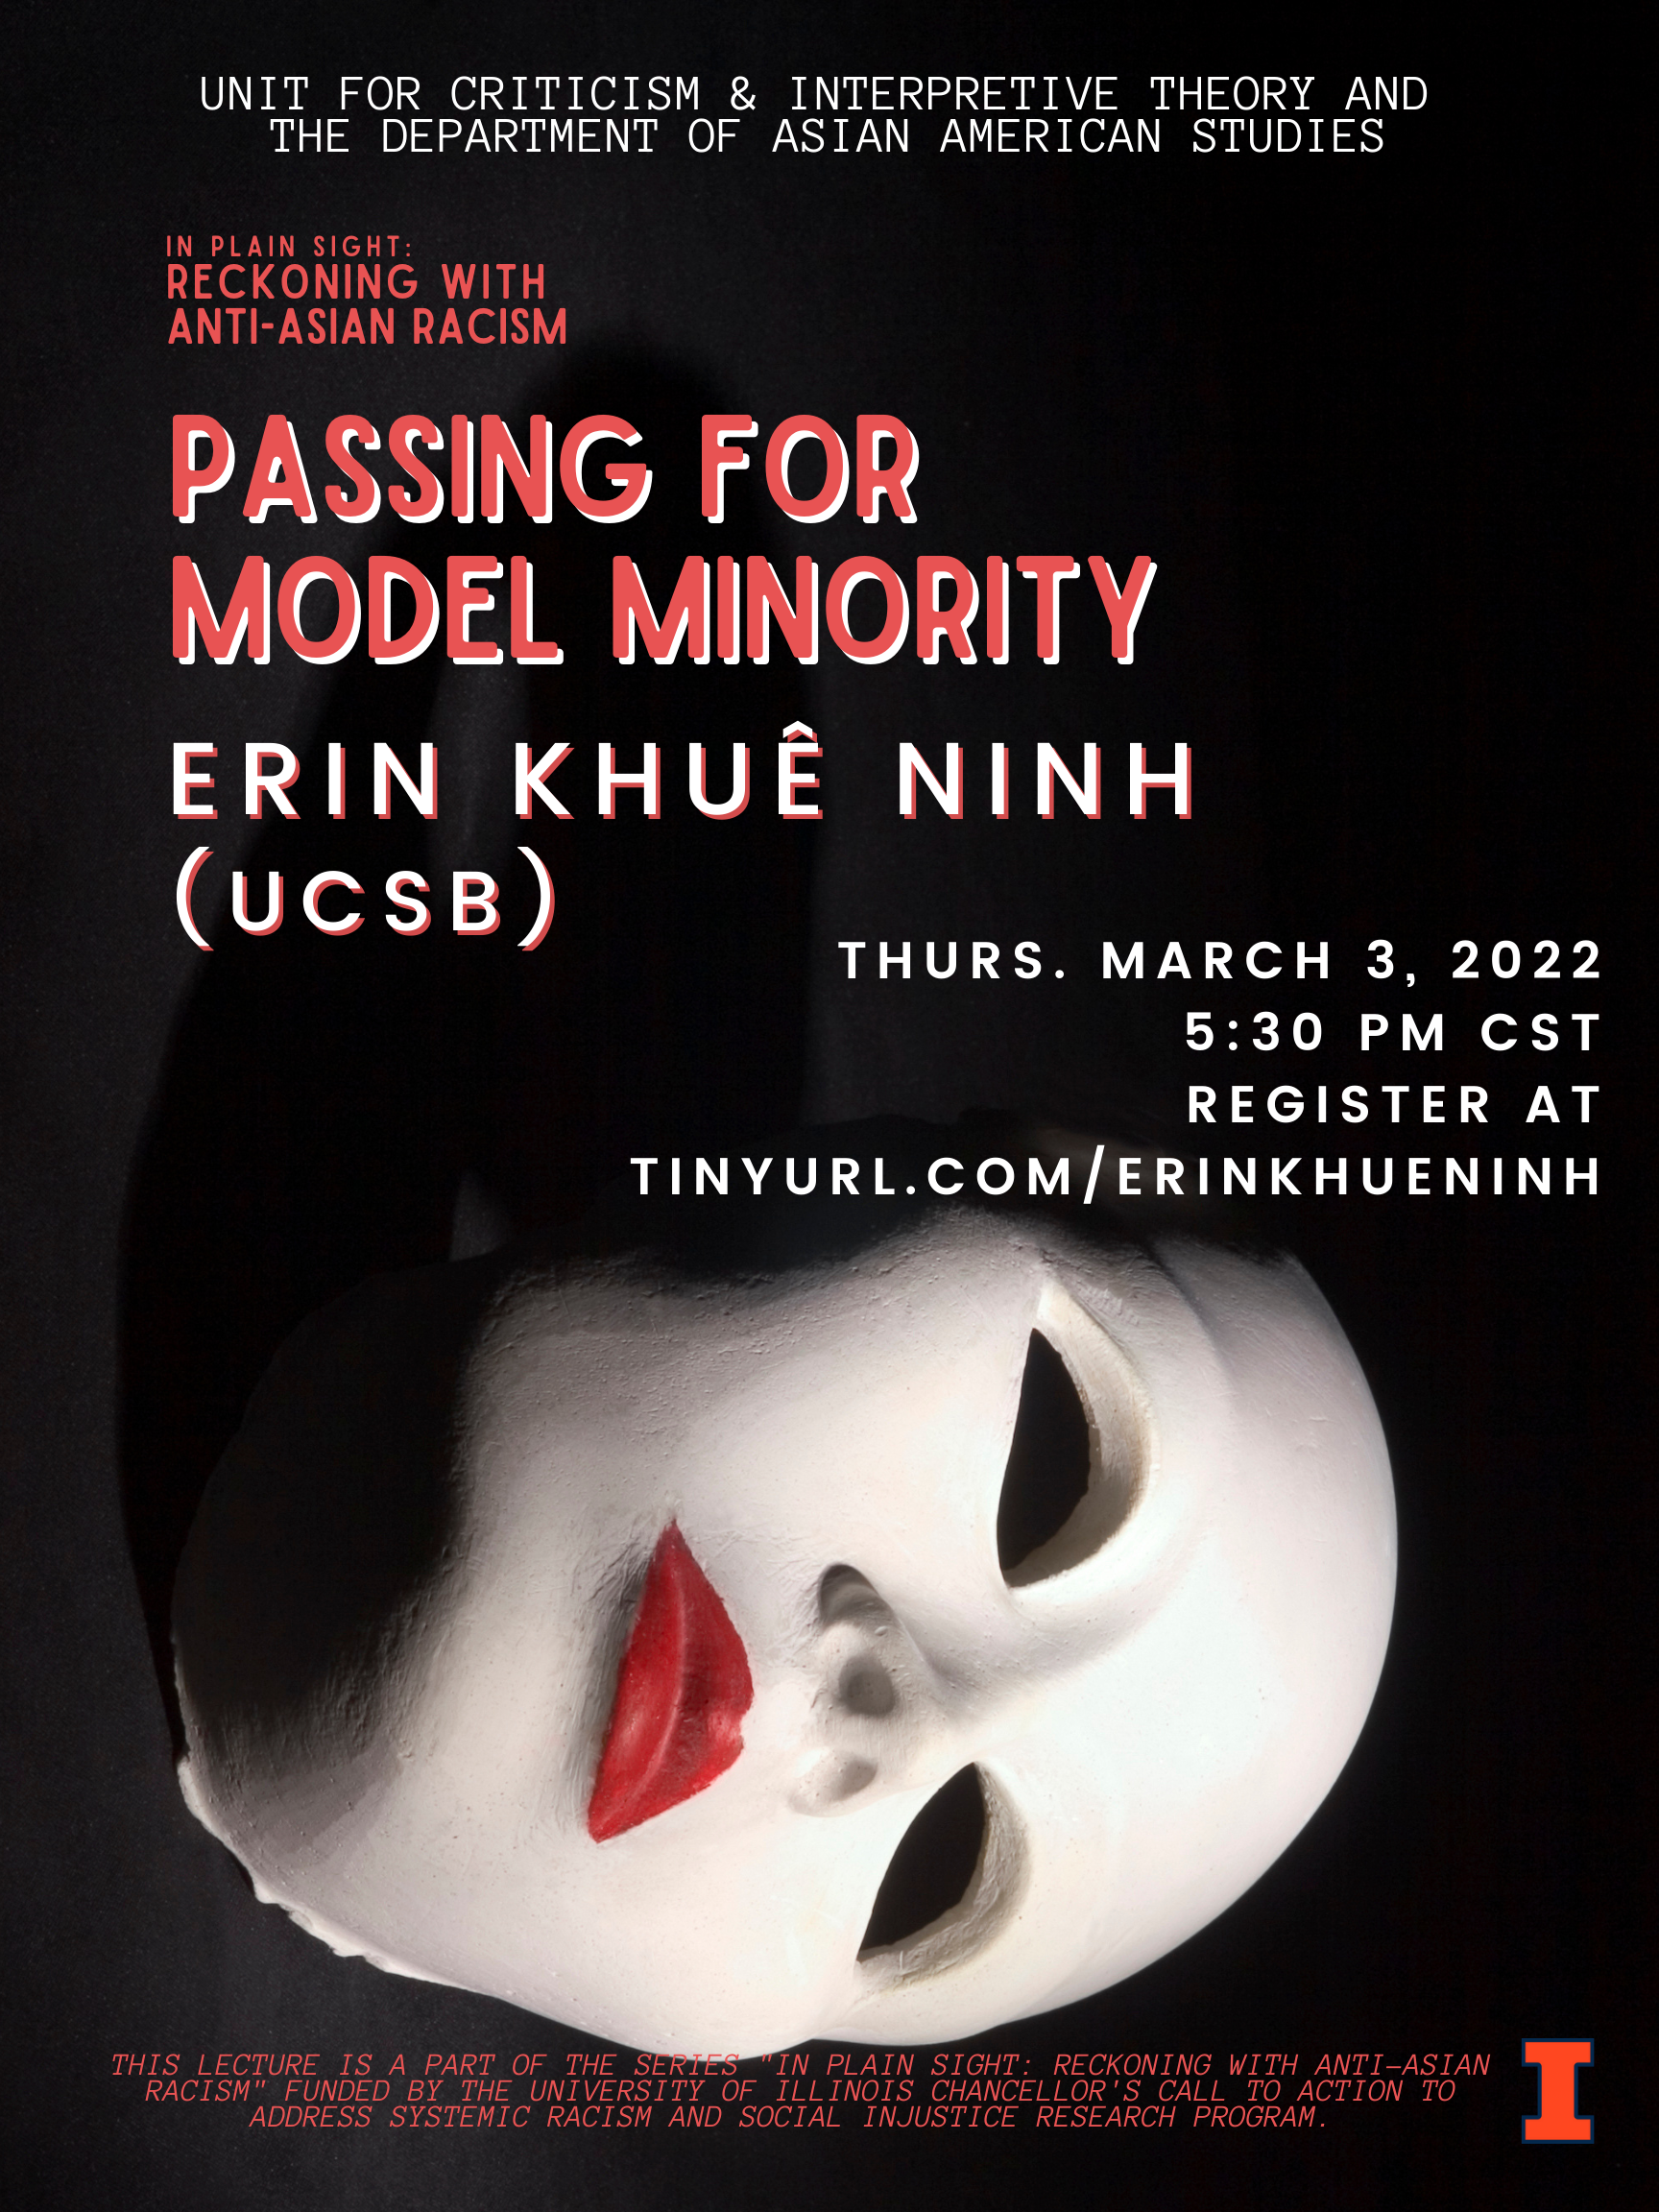 erin Khuê Ninh will lecture on "Passing for Model Minority" on March 3, 5:30 pm CST via Zoom.